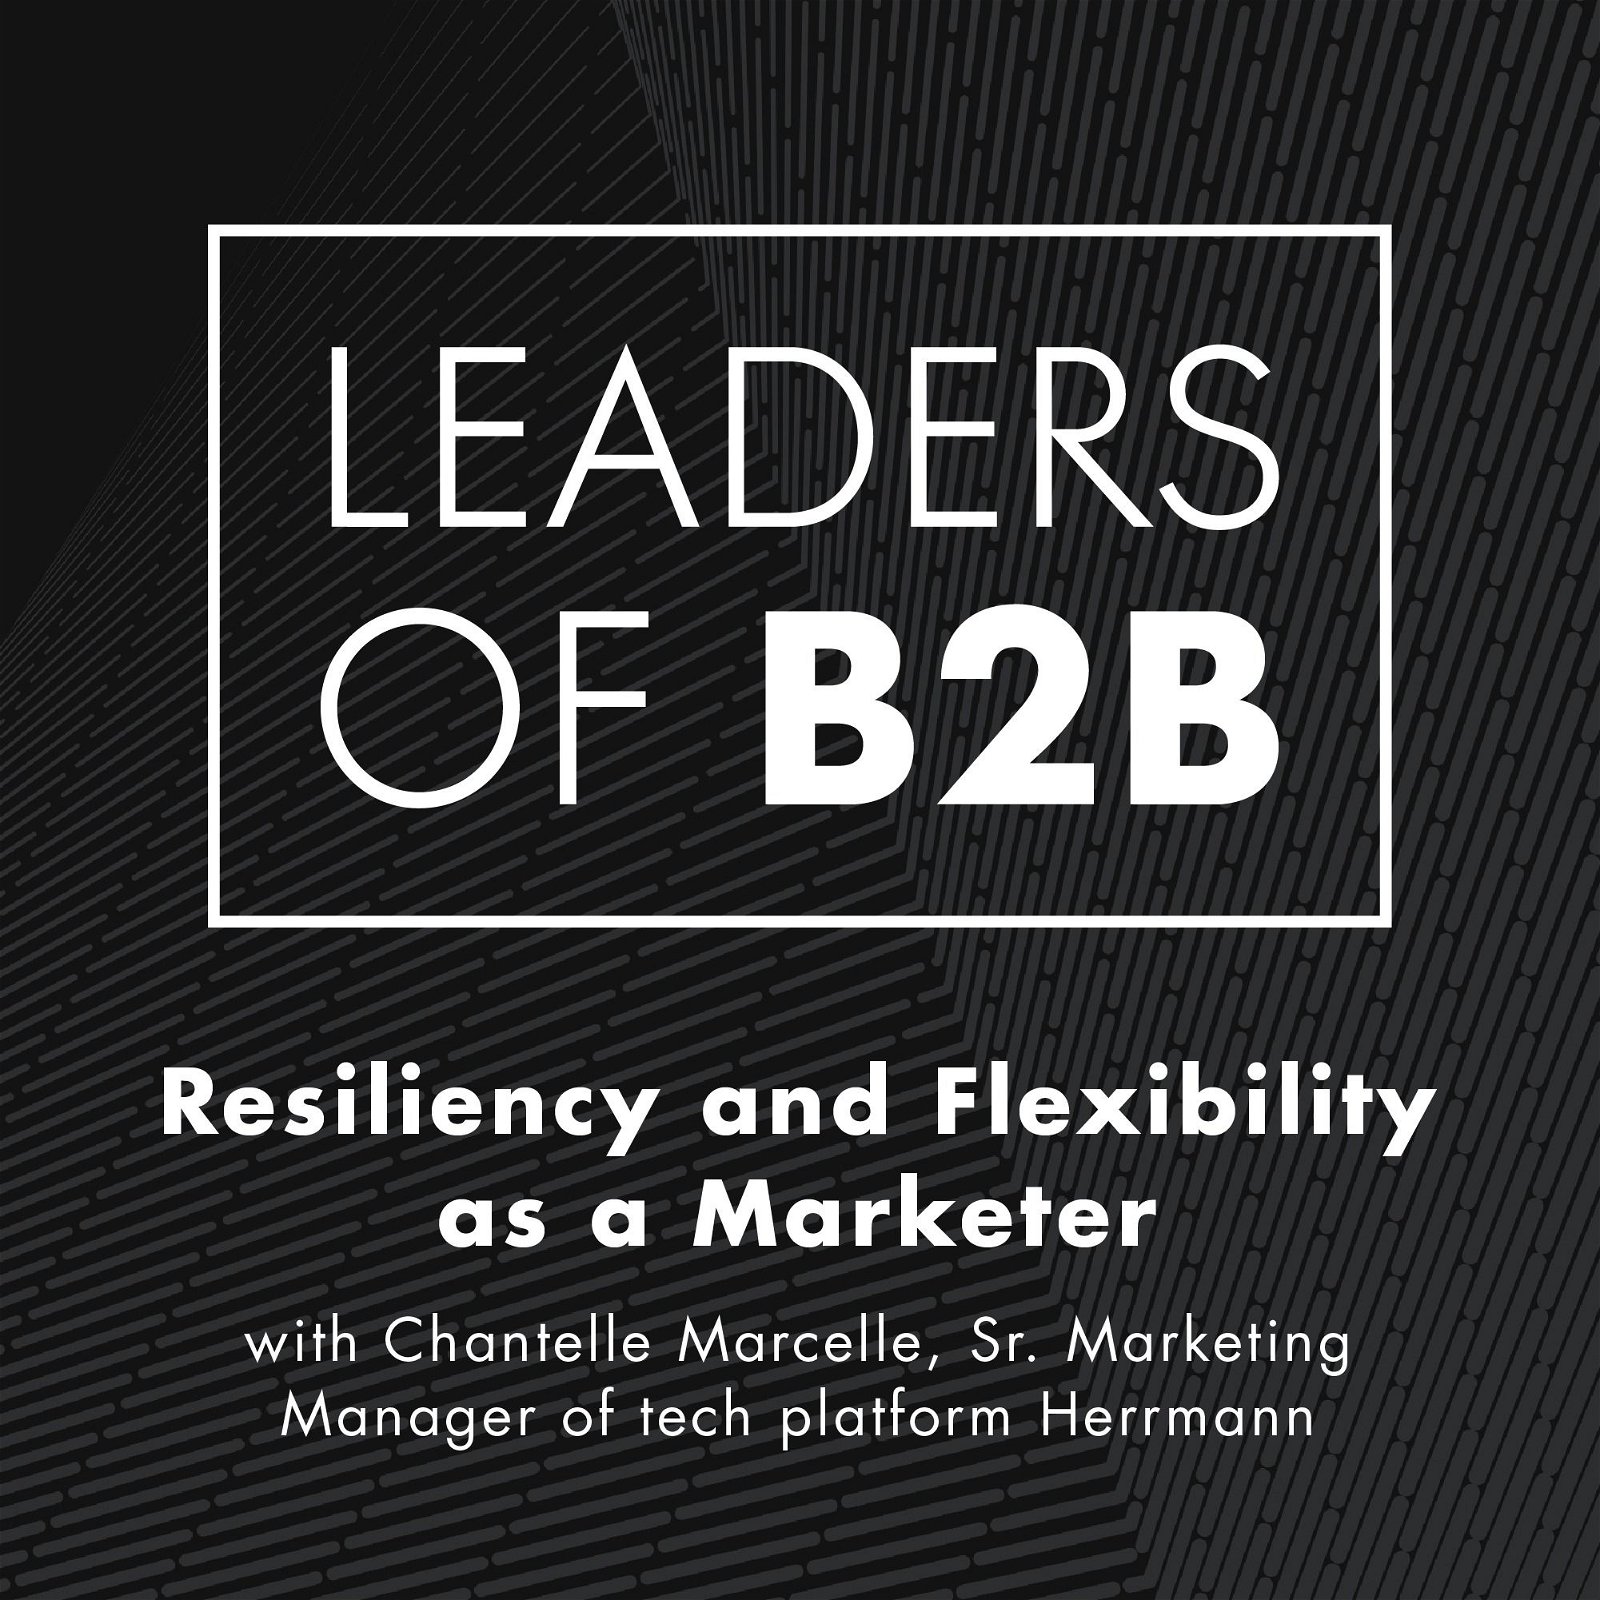 Resiliency and Flexibility as a Marketer with Chantelle Marcelle